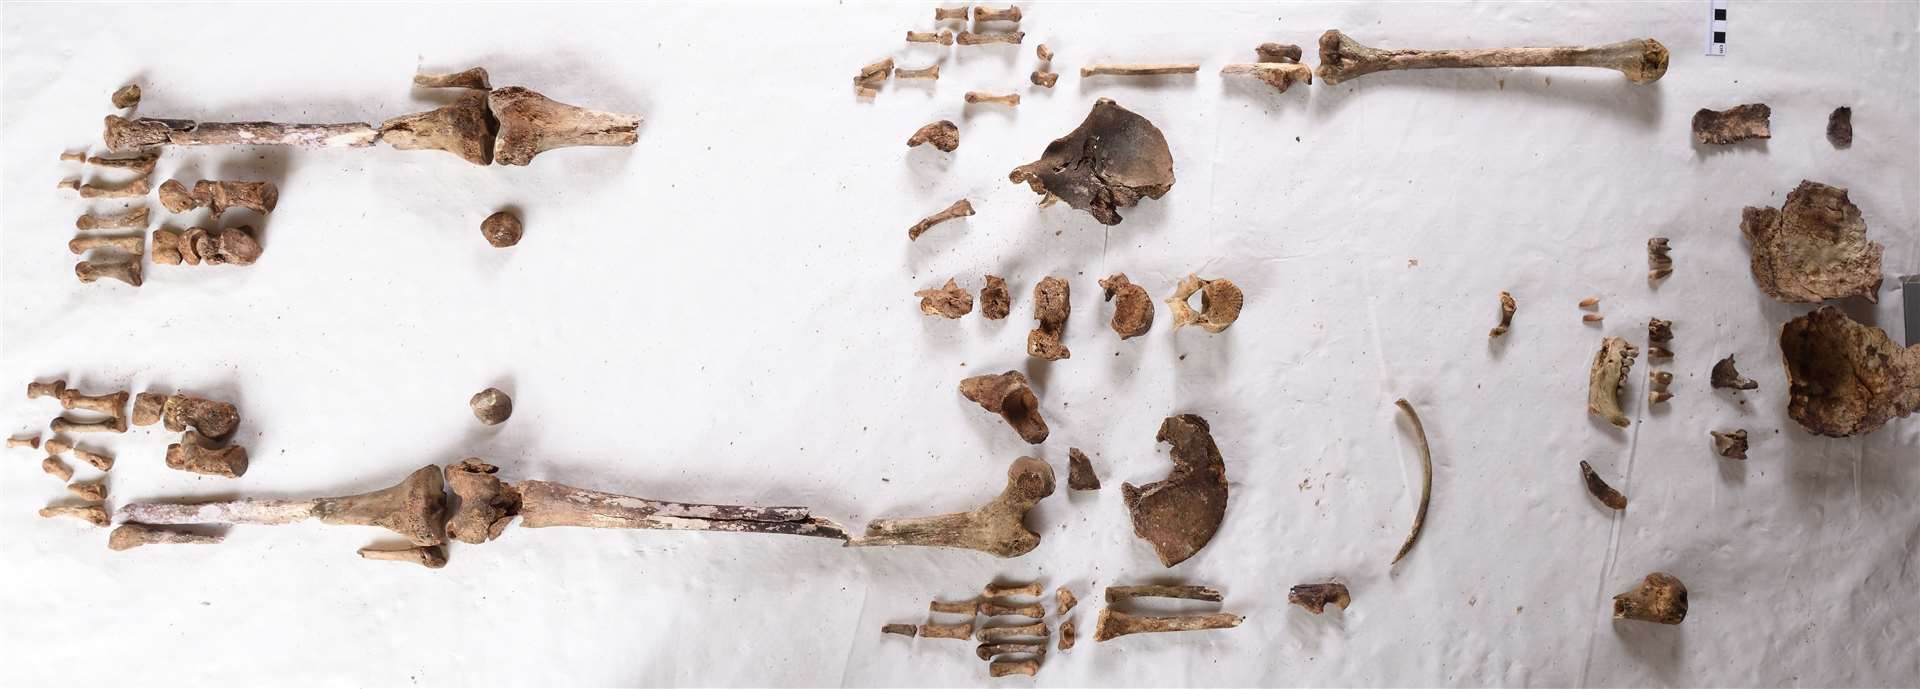 These remains, believed to be those of St Eanswythe, were found in a Folkestone church. Picture: Mark Hourahane